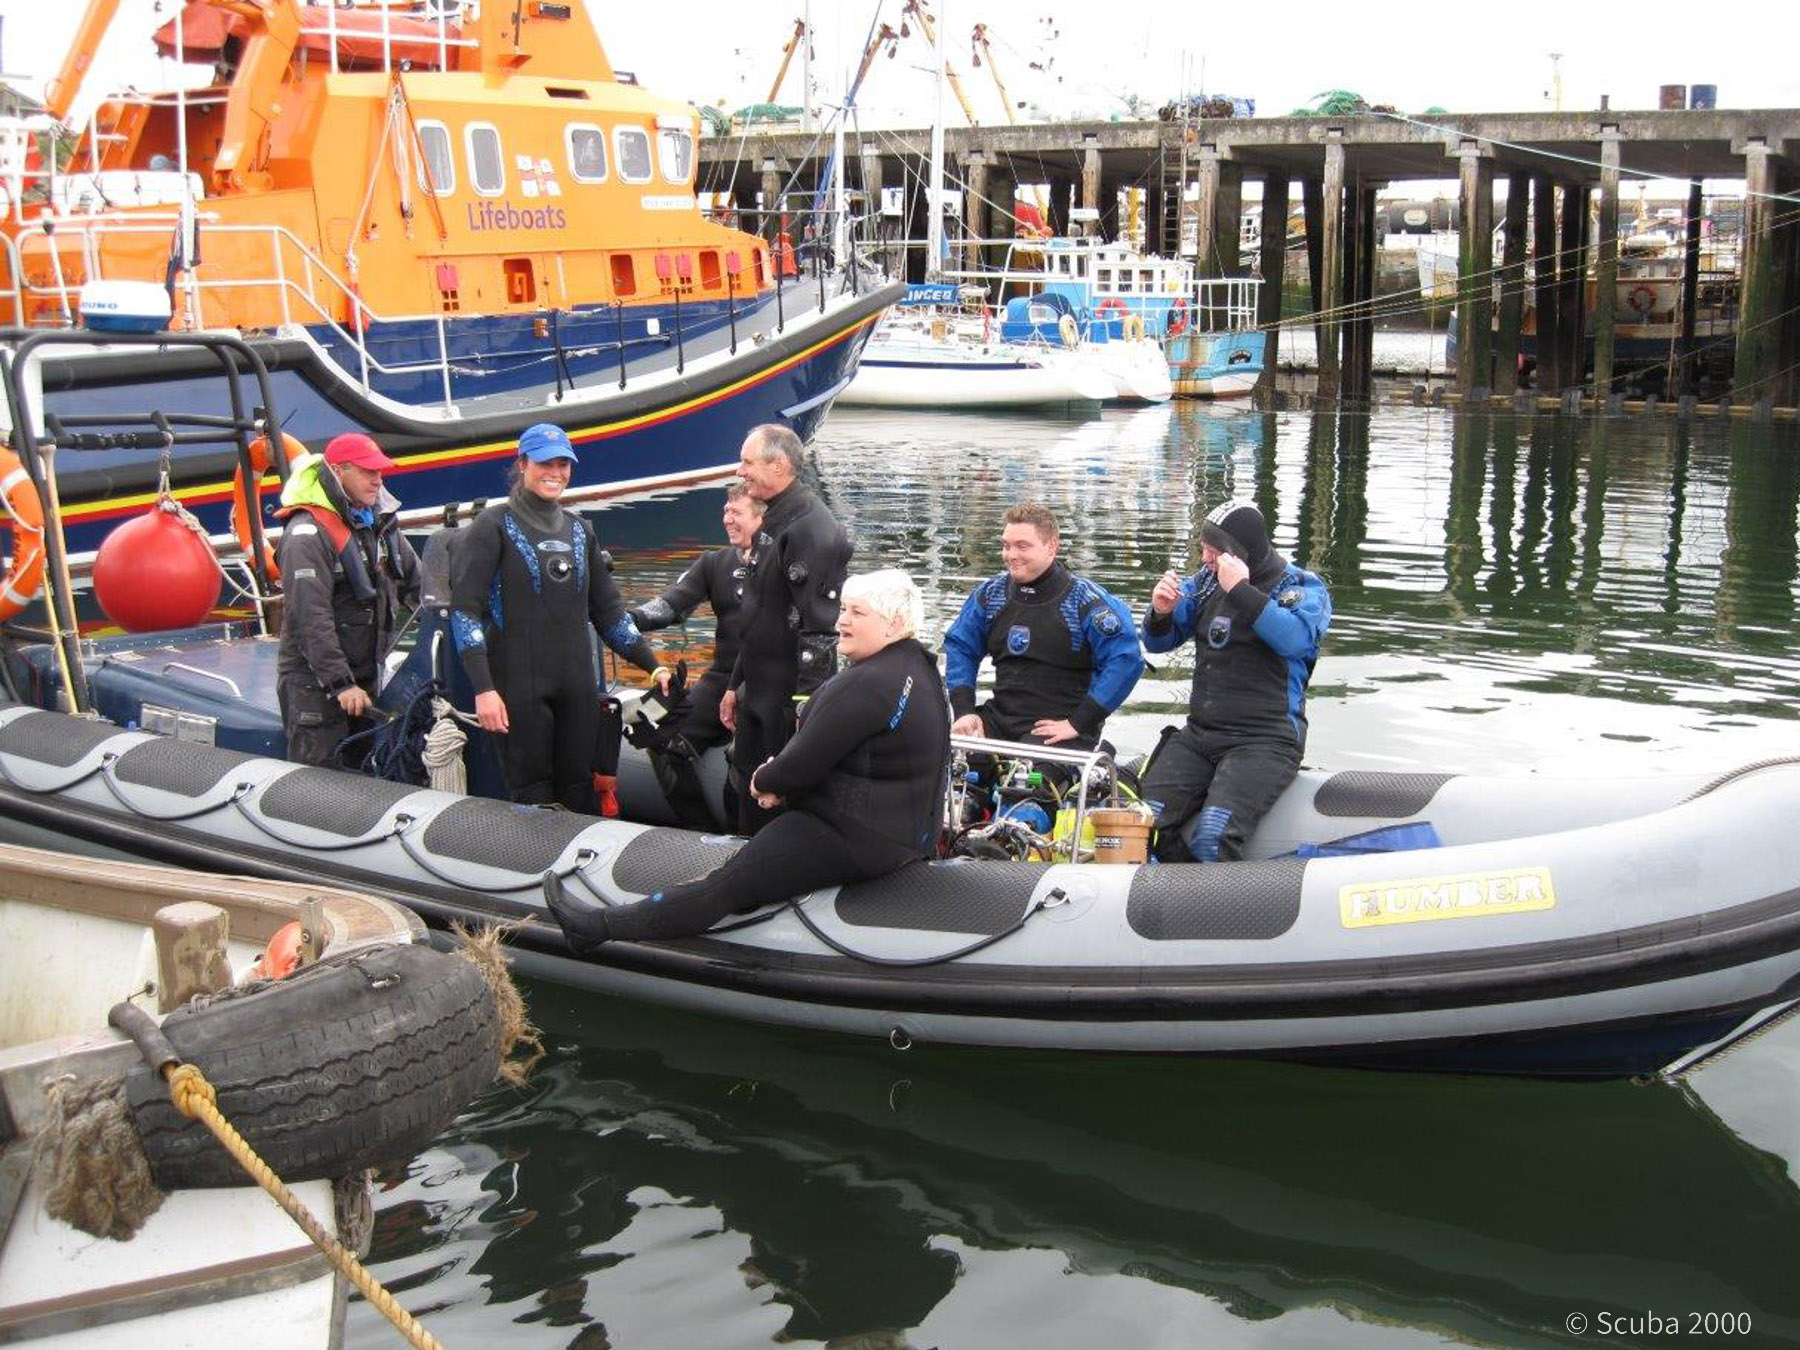 Scuba 2000 run boat and beach diving trips and VIP guided diving in Cornwall, UK